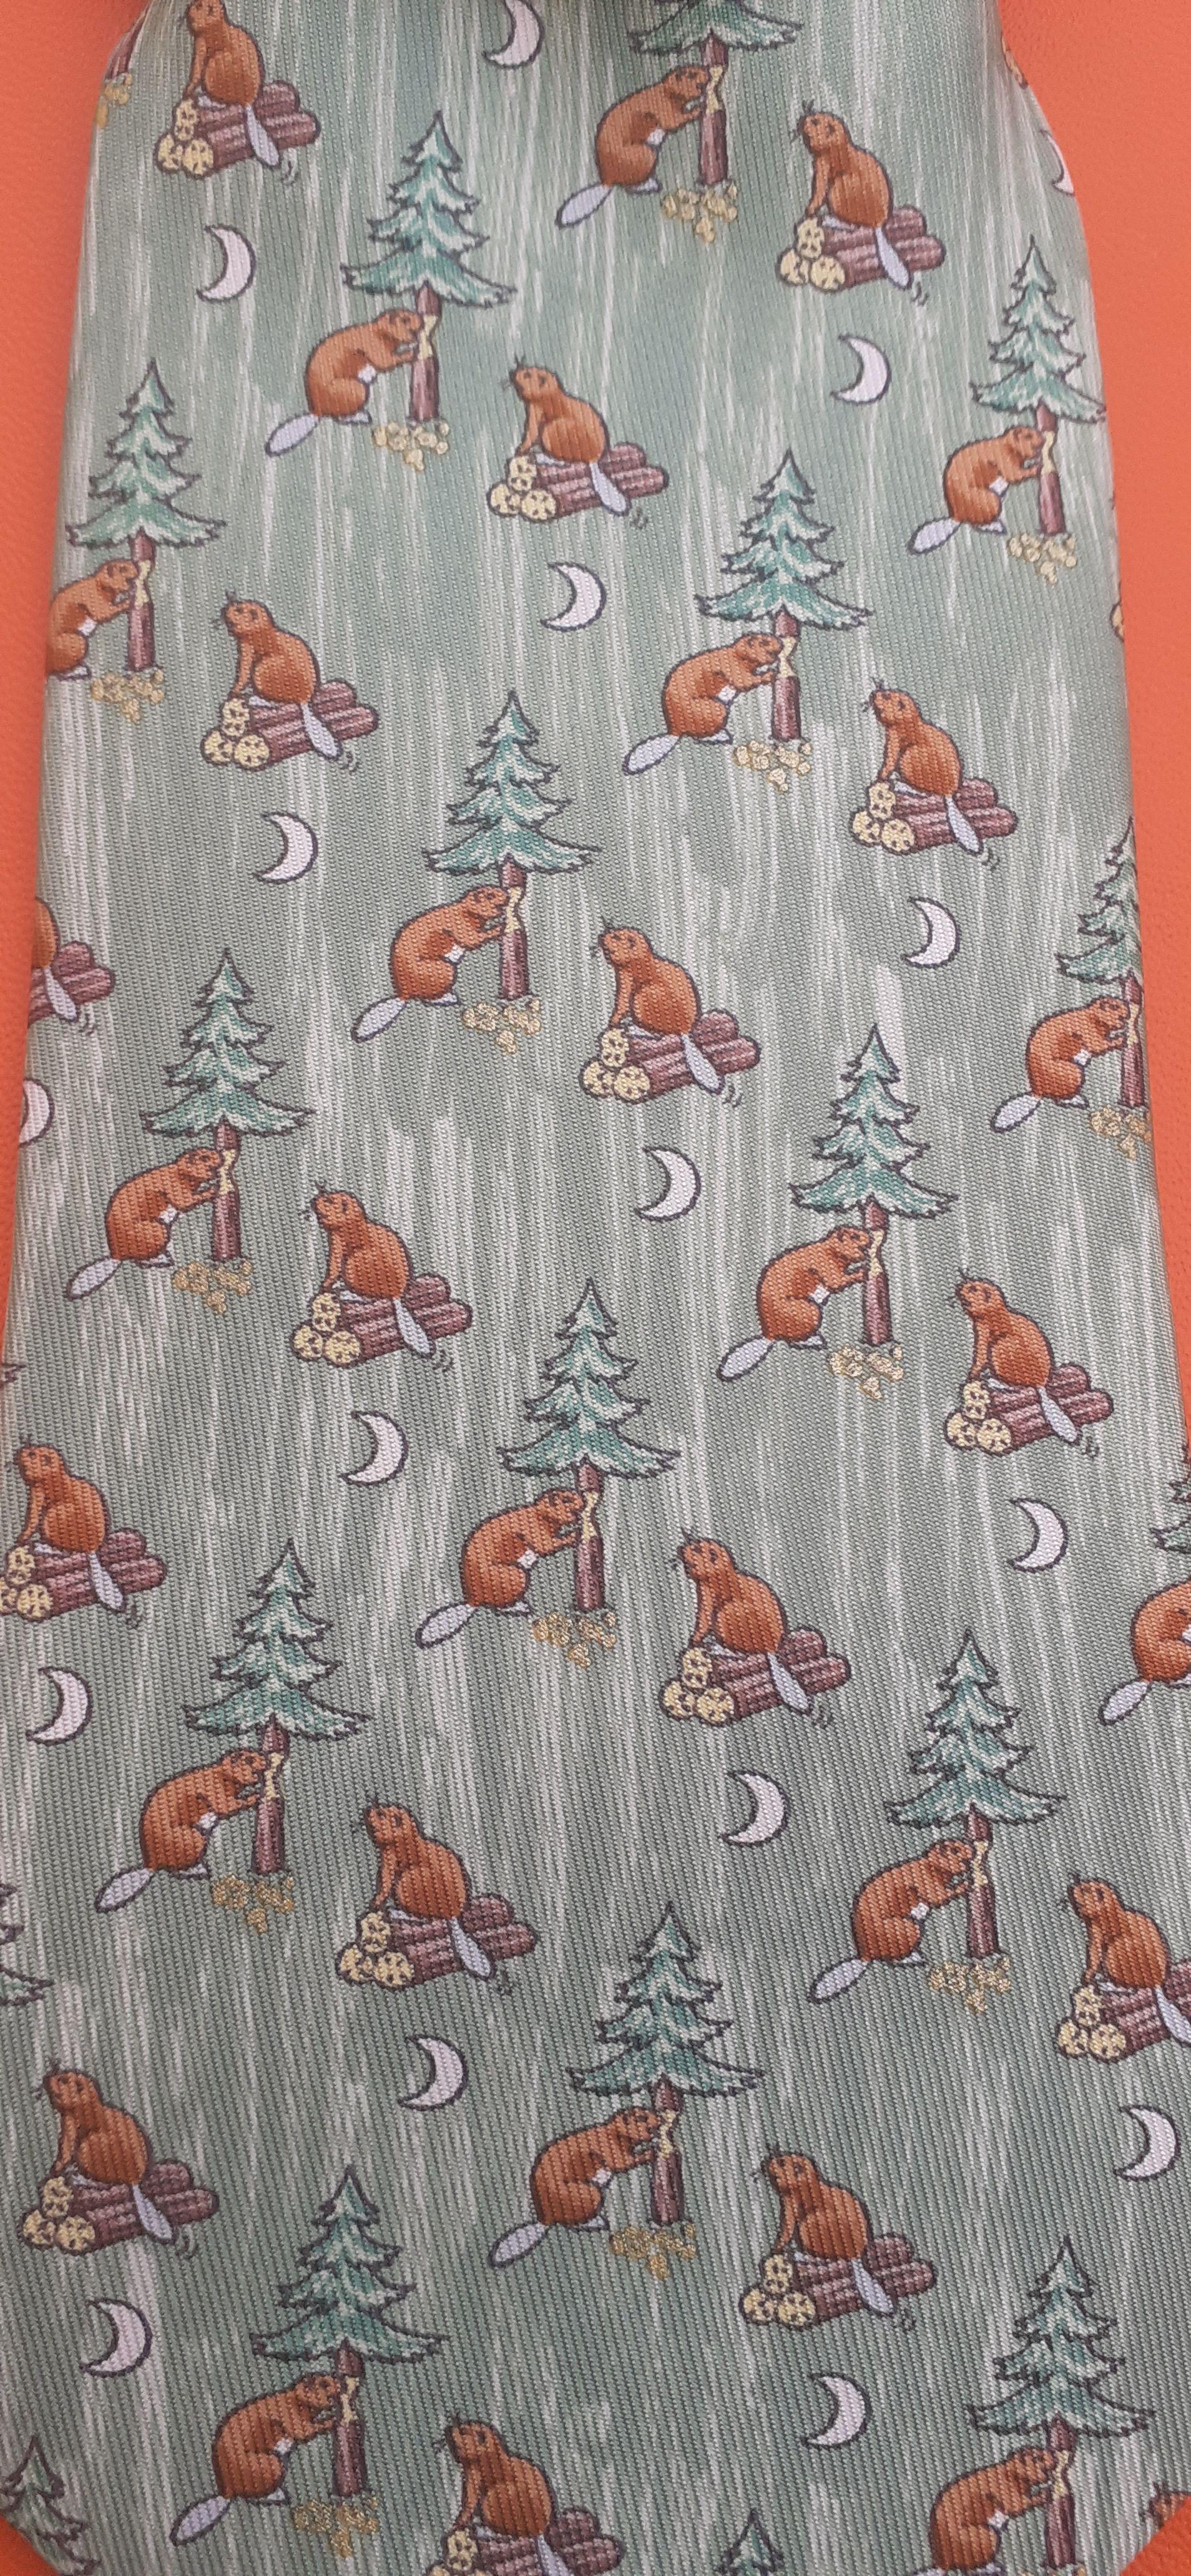 Beautiful Authentic Hermès Tie

Print: Beavers, Fir Trees and Moons

Made in France

Made of 100% Silk

Colorways: Green, Brown, Yellow, White

Please note: green is more vibrant in 